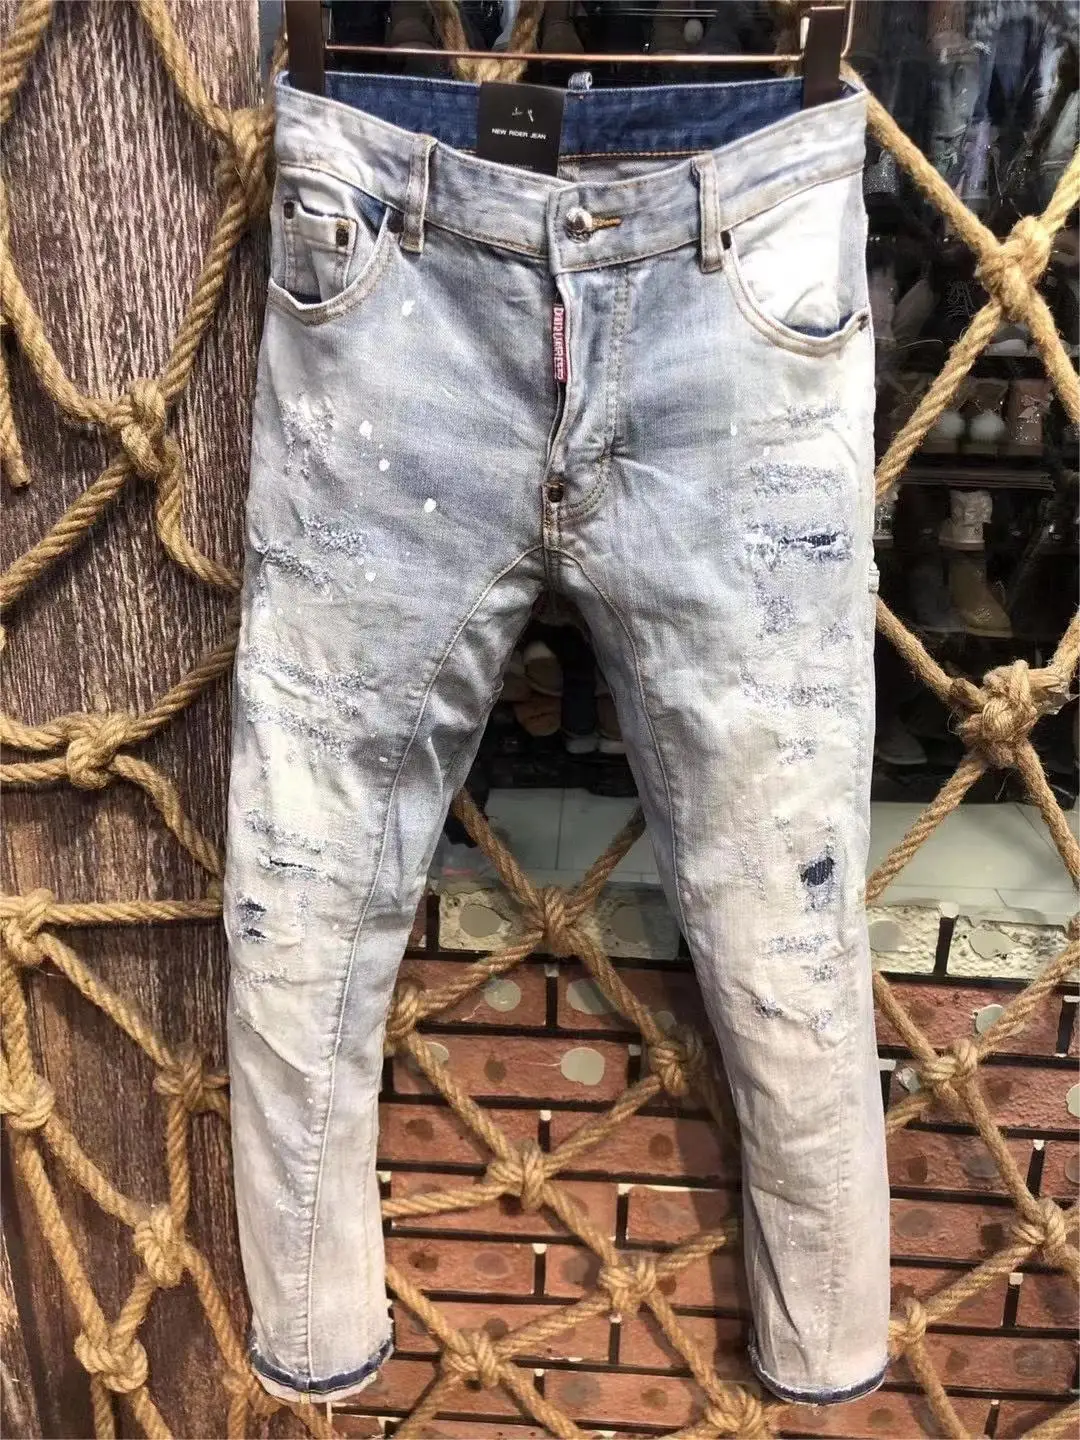 

2023 new fashion tide brand men's washing worn out torn paint locomotive jeans A212